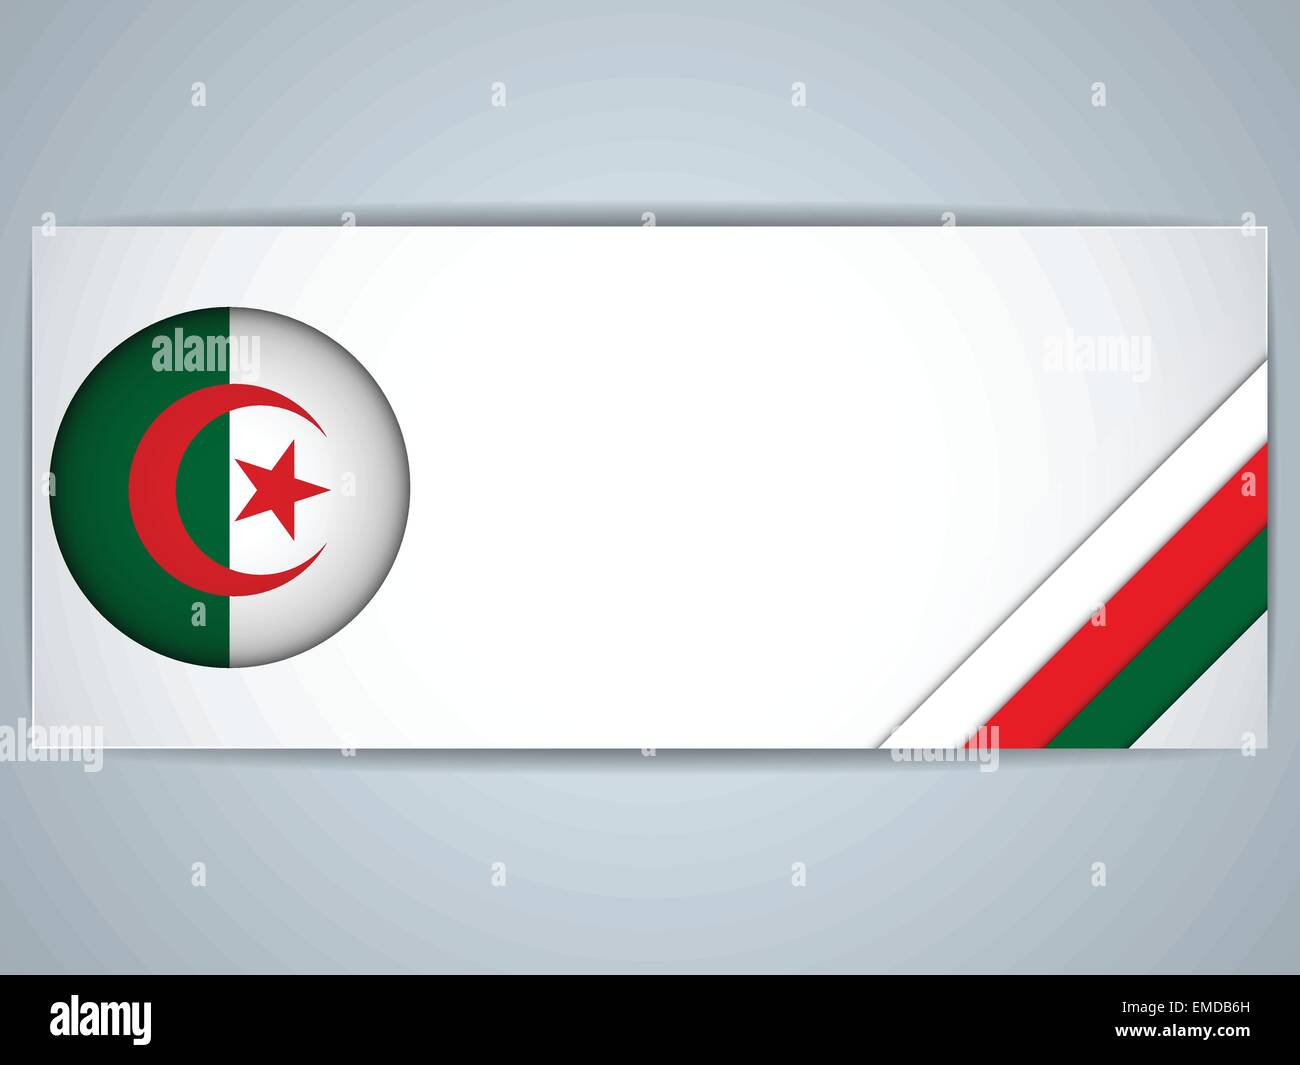 Algeria Country Set of Banners Stock Vector